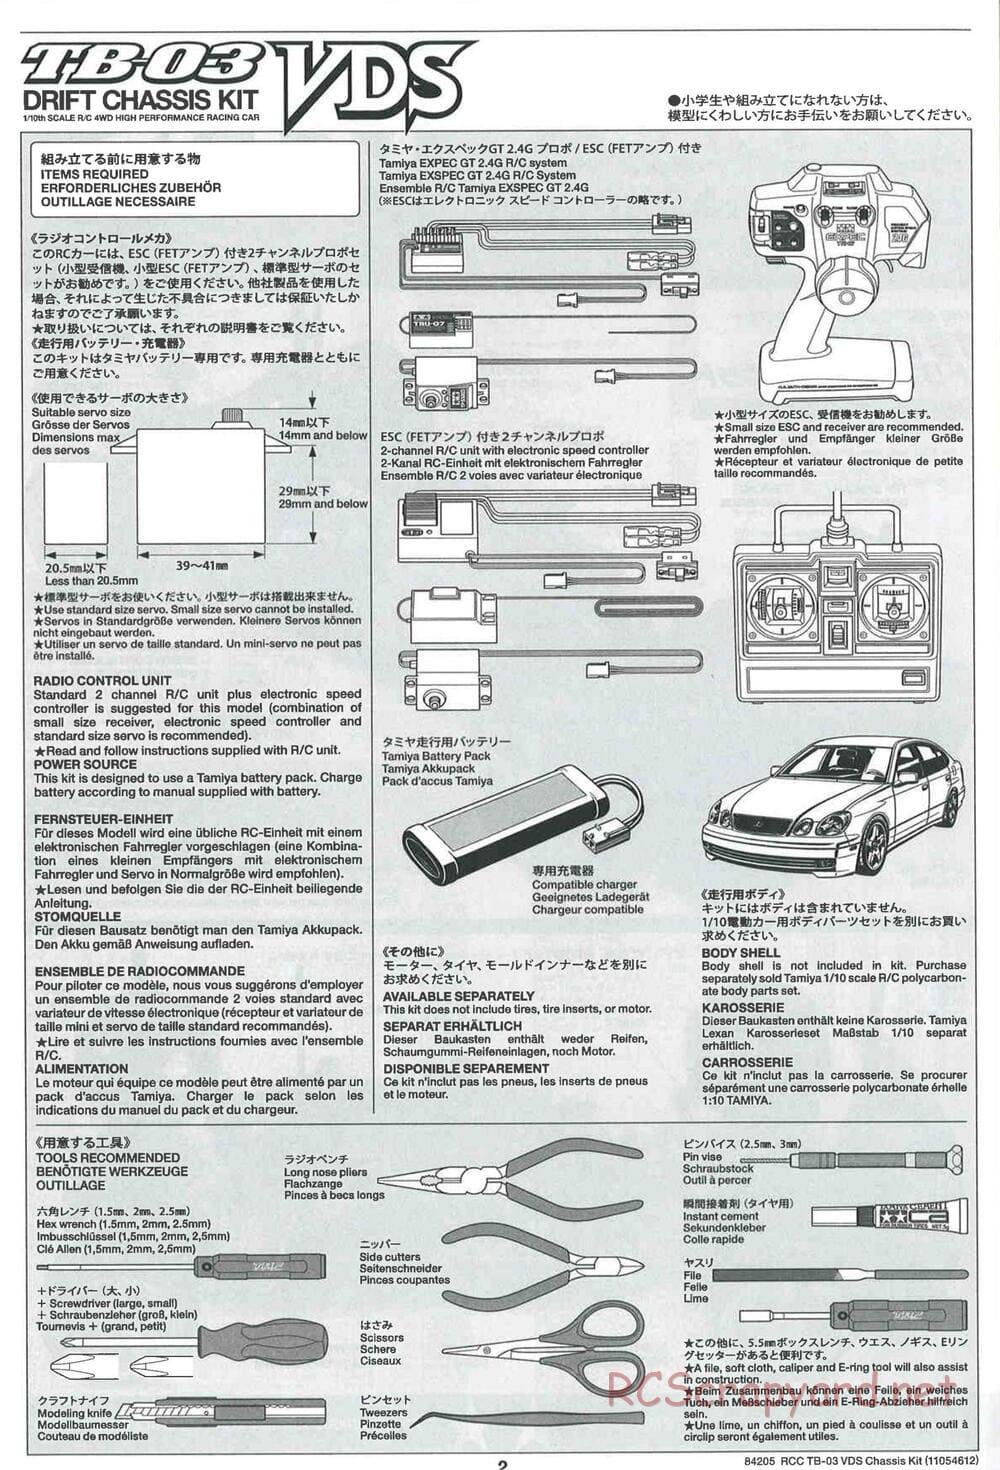 Tamiya - TB-03 VDS Drift Spec Chassis - Manual - Page 2